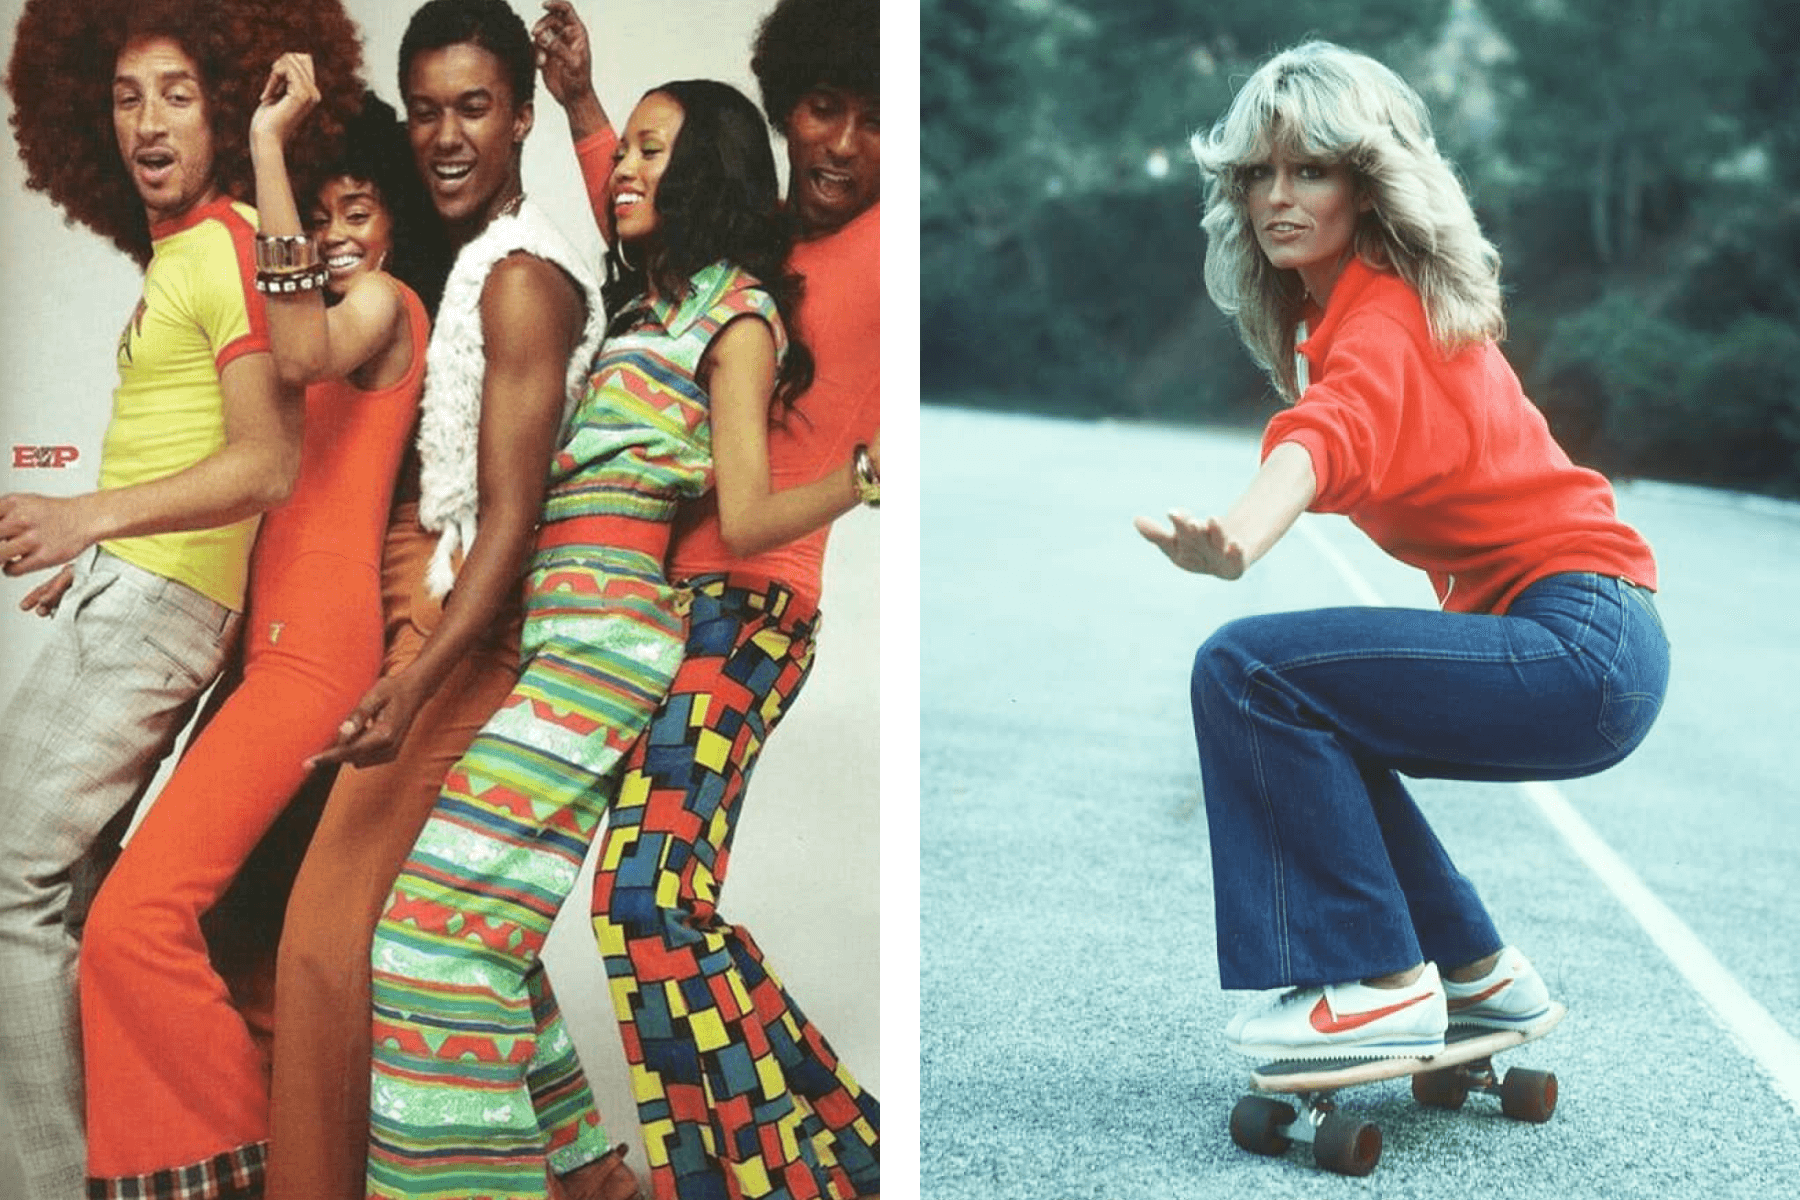 Alt text left: Five people in ​​colorful ’70s clothing dance. Right: Farah Fawcett balances on a skate board.